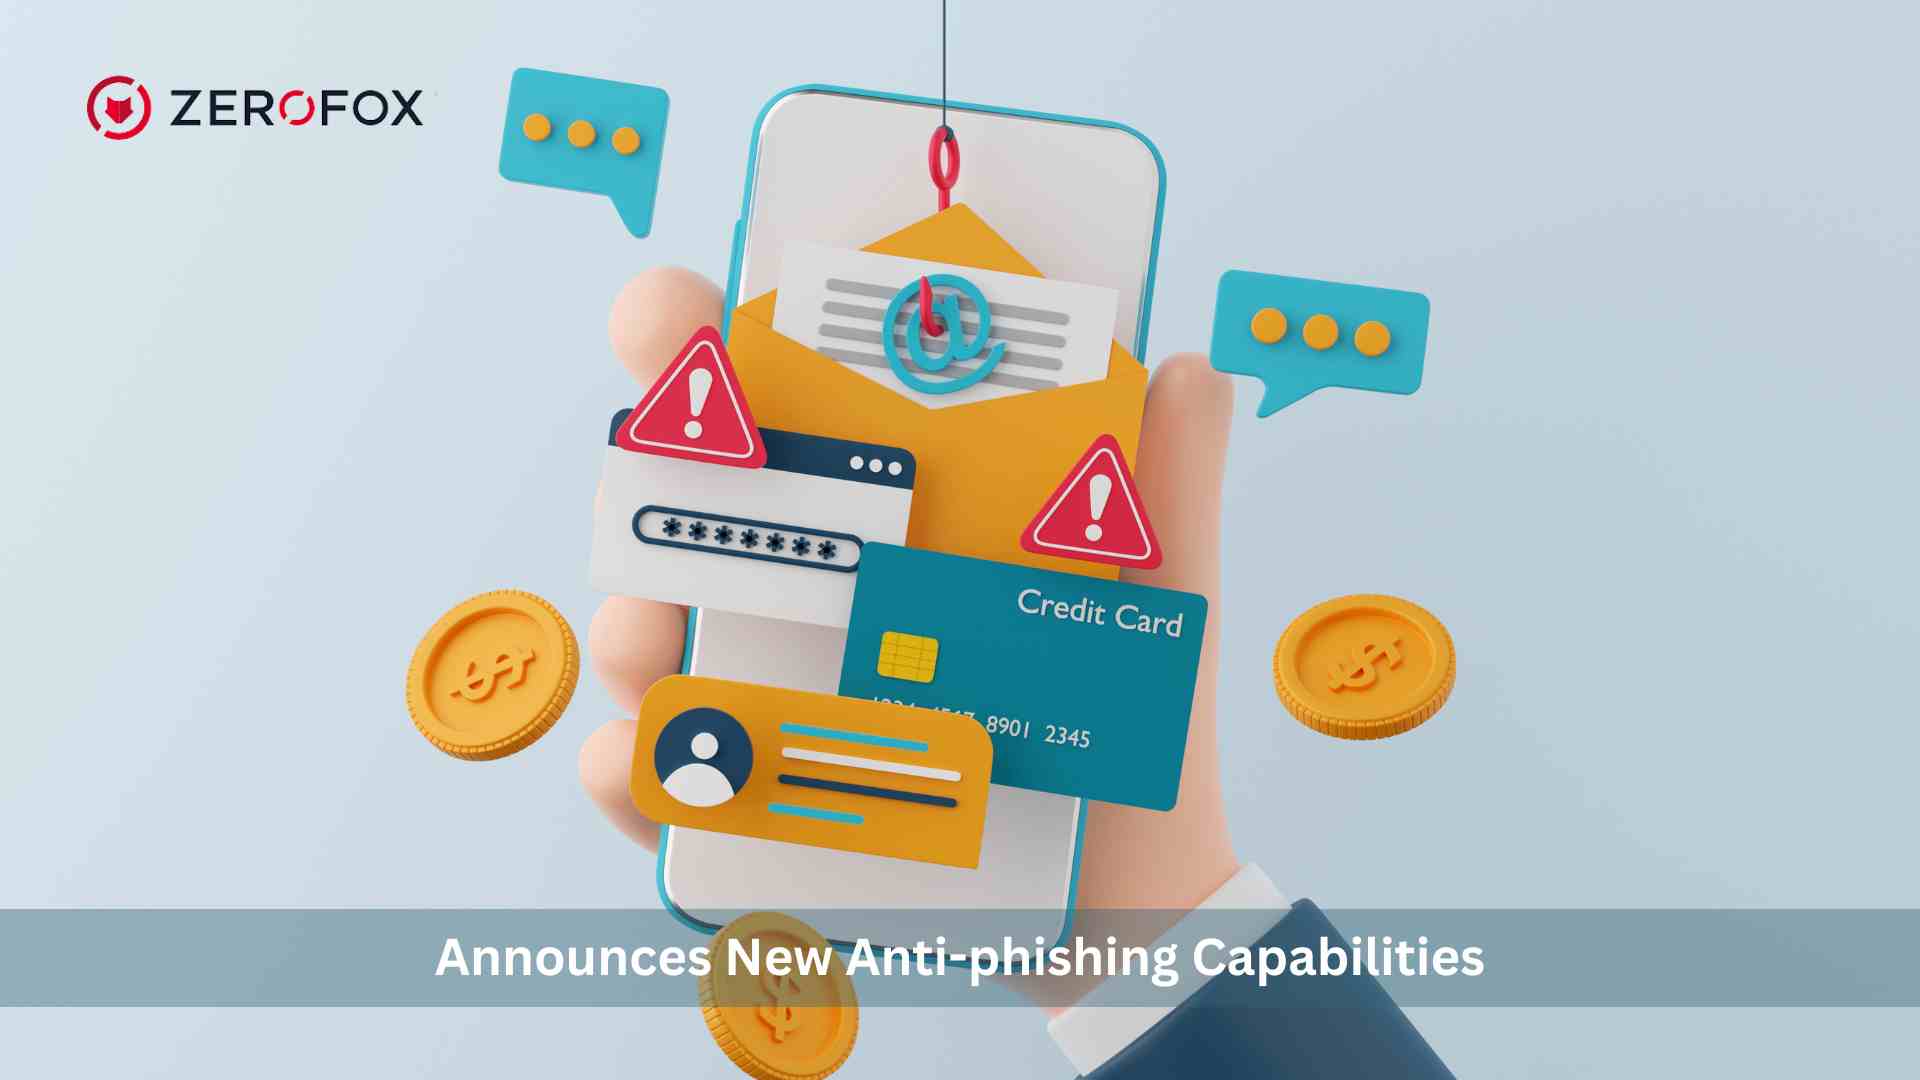 ZeroFox Announces New Anti-Phishing Capabilities to Stop Emergent and Multi-Channel Phishing Attacks at the Source